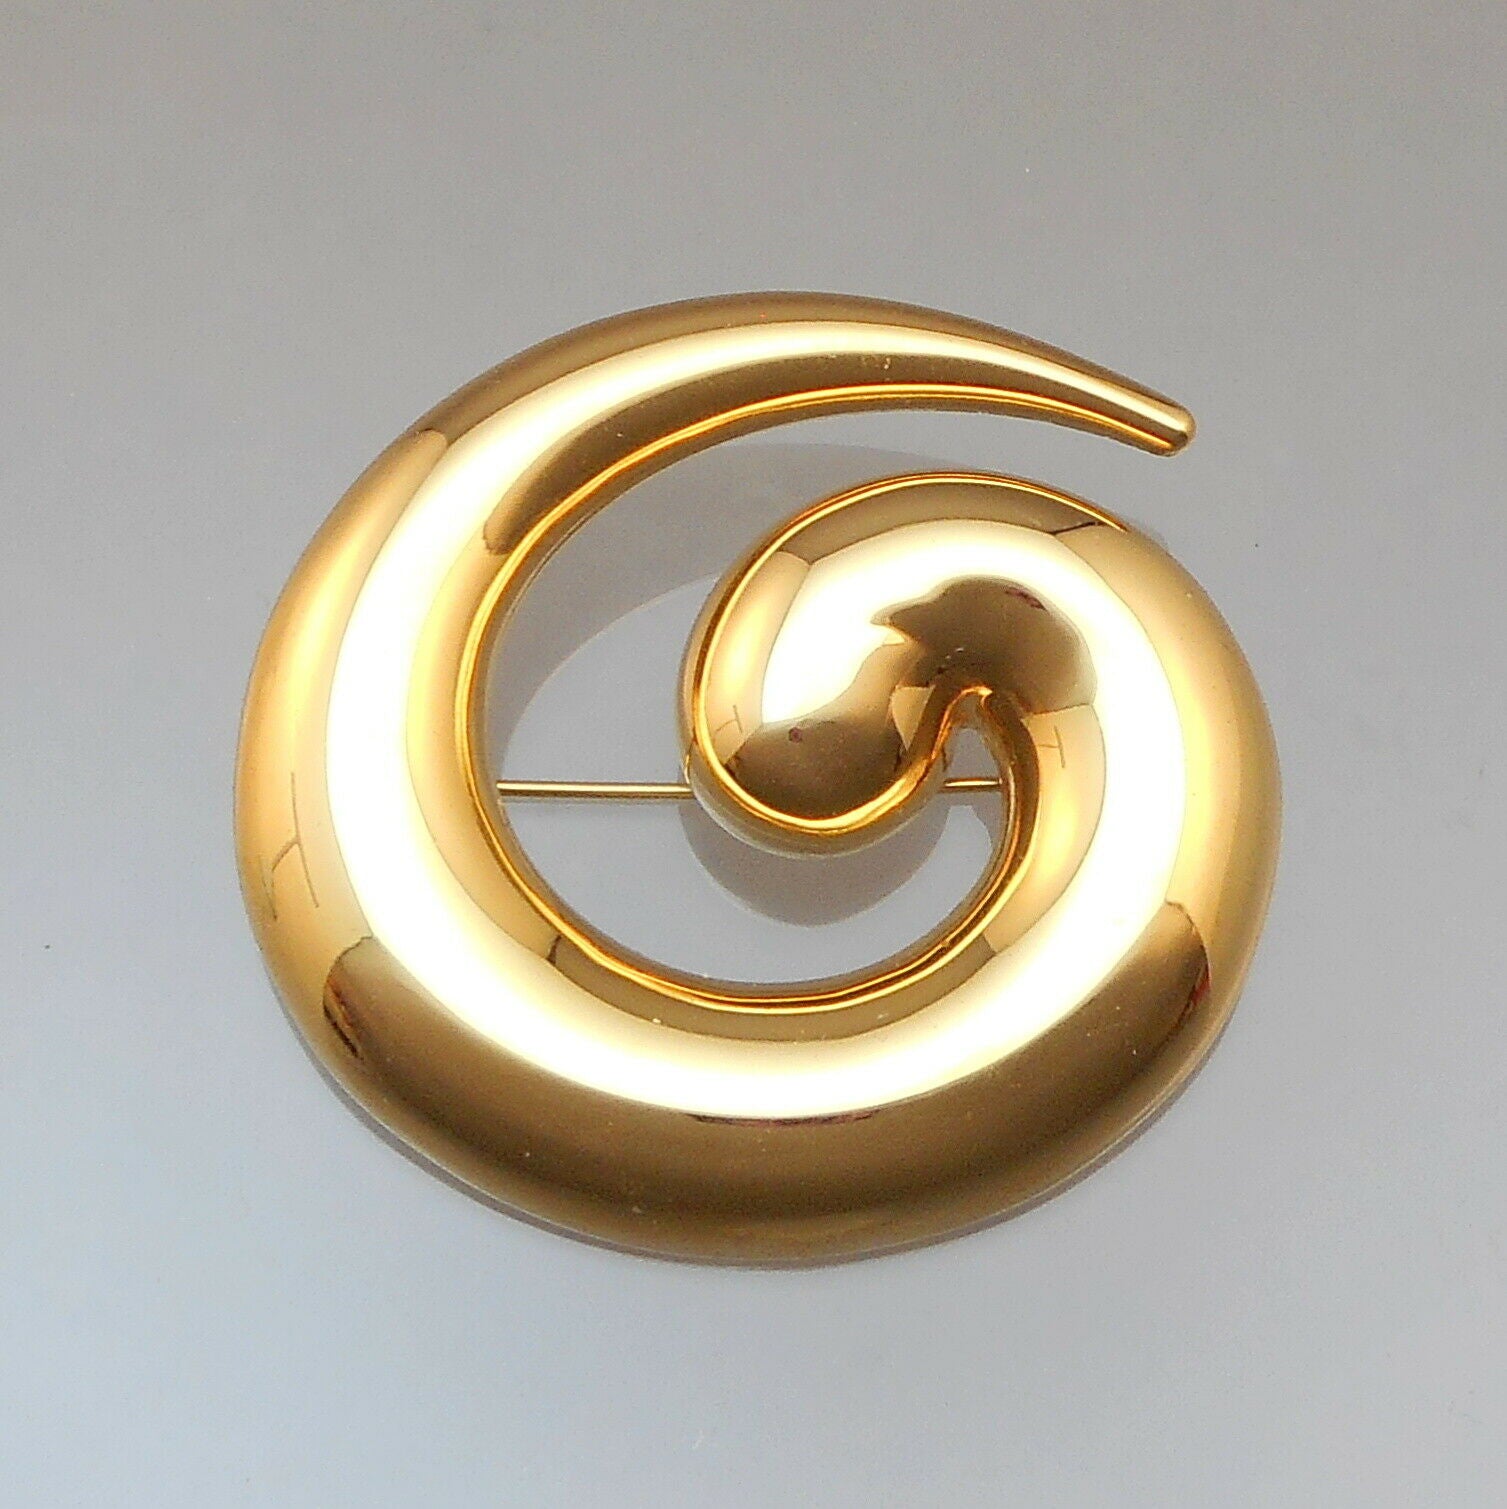 Chanel 2019 Faux Pearl & Enamel CC Brooch - Gold-Plated Pin, Brooches -  CHA905749